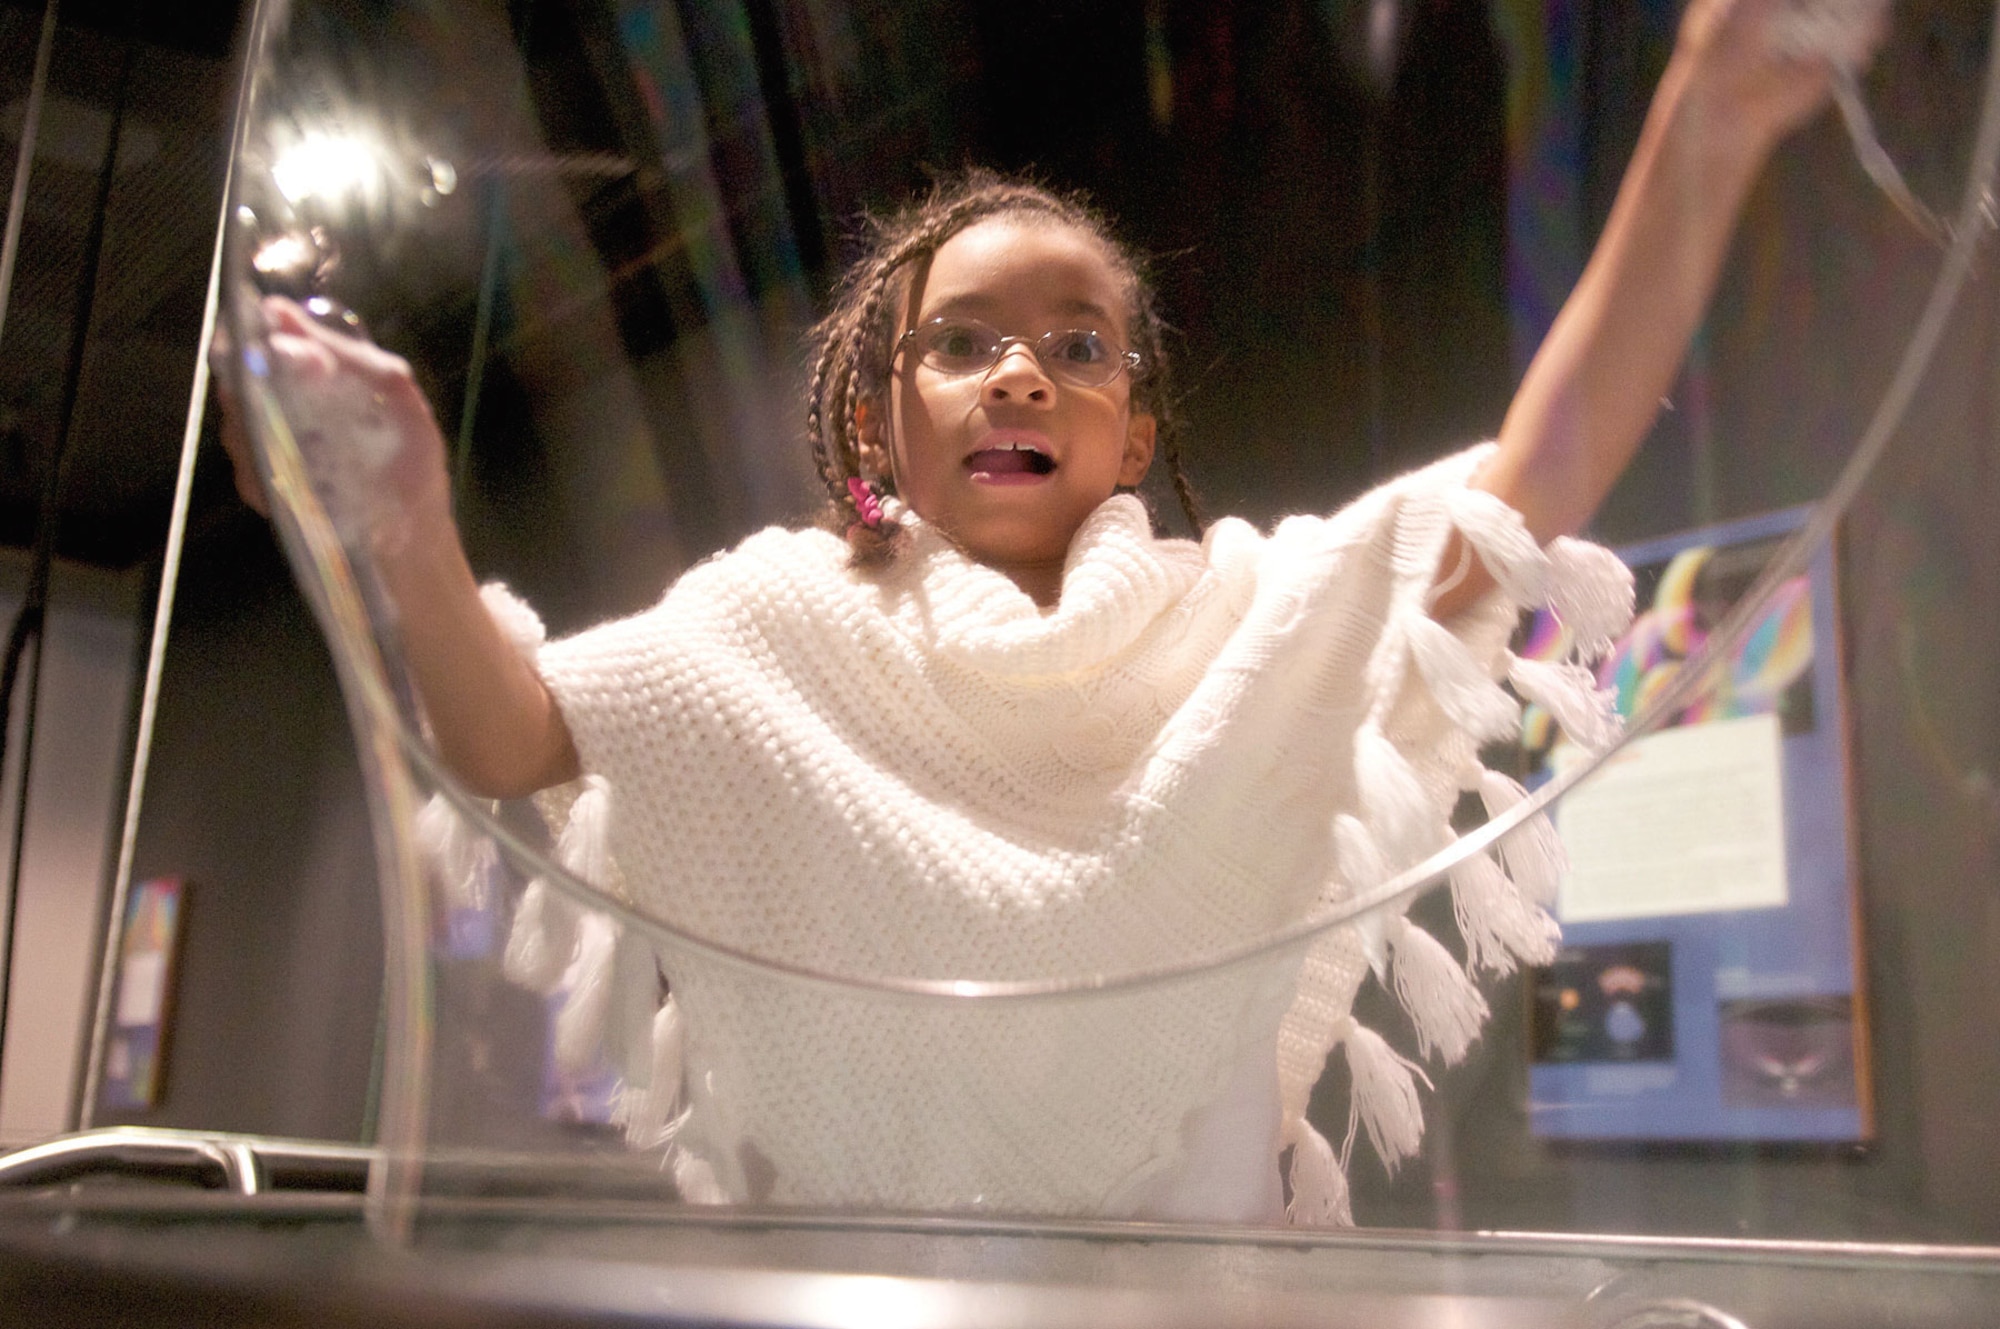 Jaida Carazo, 9, daughter of 2nd Lt. Edmund Carazo, 1st Battalion, 501st Infantry Regiment (Airborne), makes oversize bubbles at the Imaginarium Discovery Center, Oct. 14. The IDC offers learning activities and exhibitions for all ages. (U.S. Air Force photo/David Bedard)